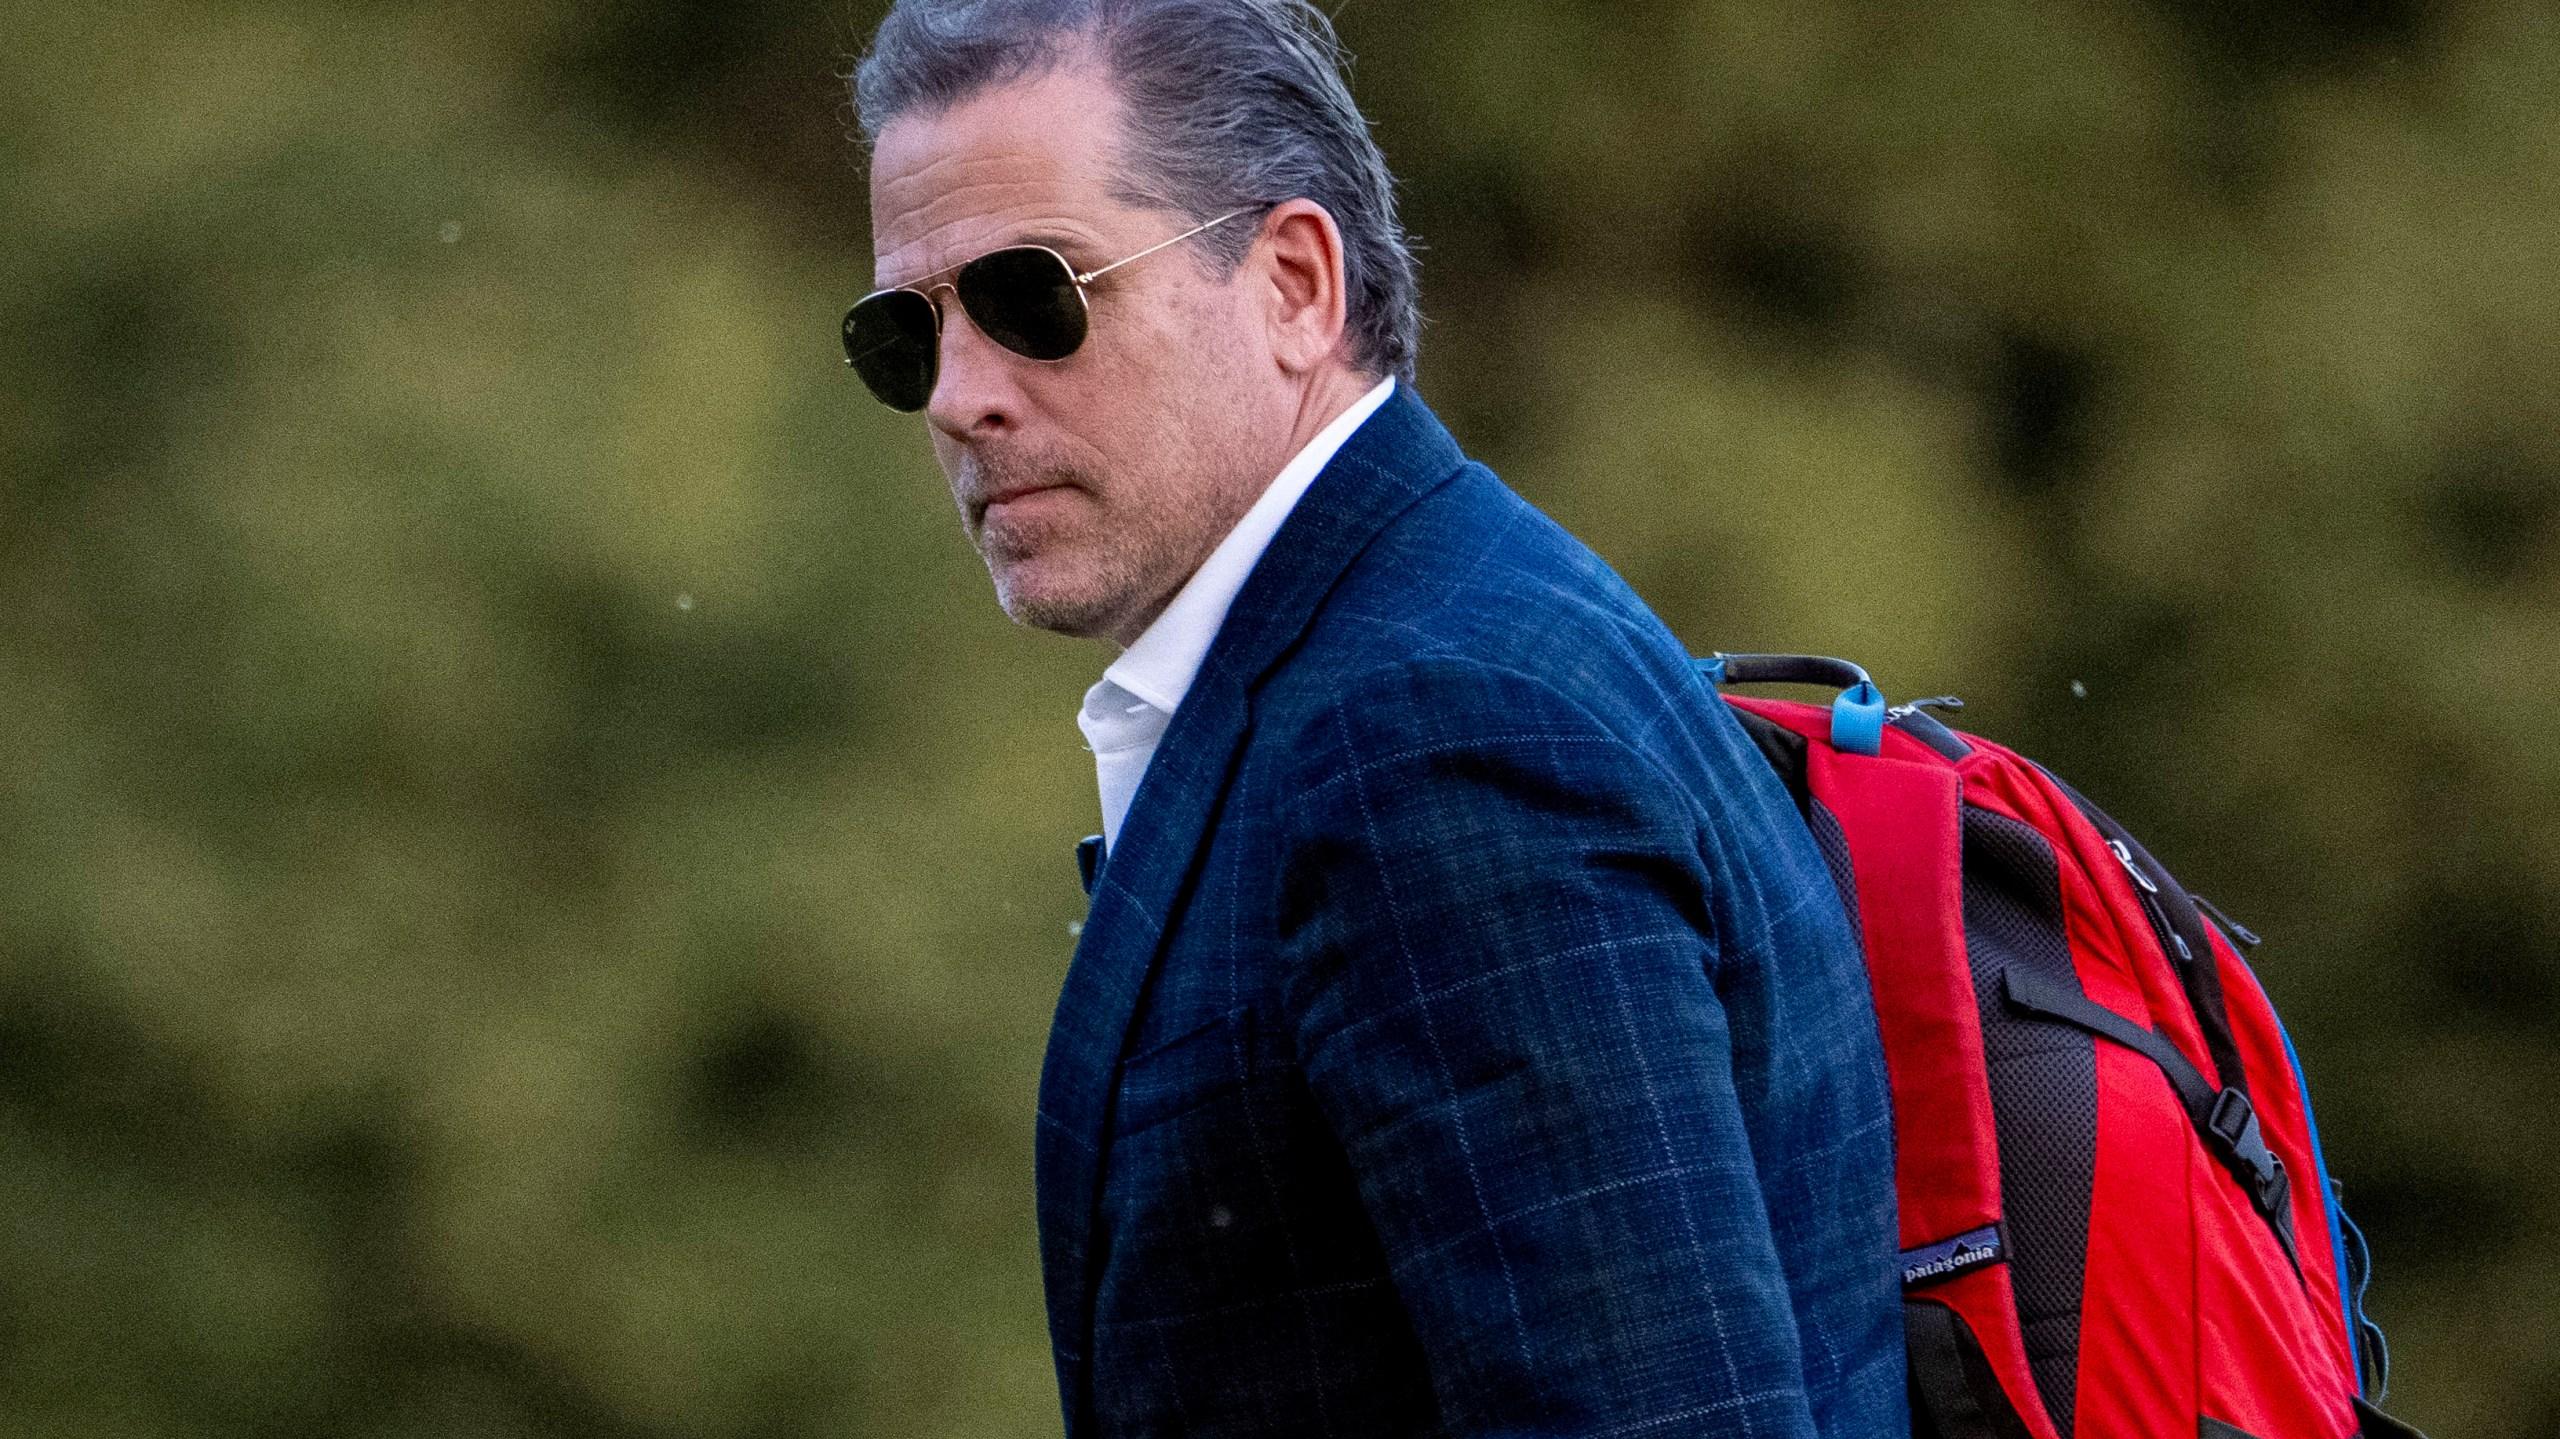 Hunter Biden Is Indicted On Tax Charges Adding To Gun